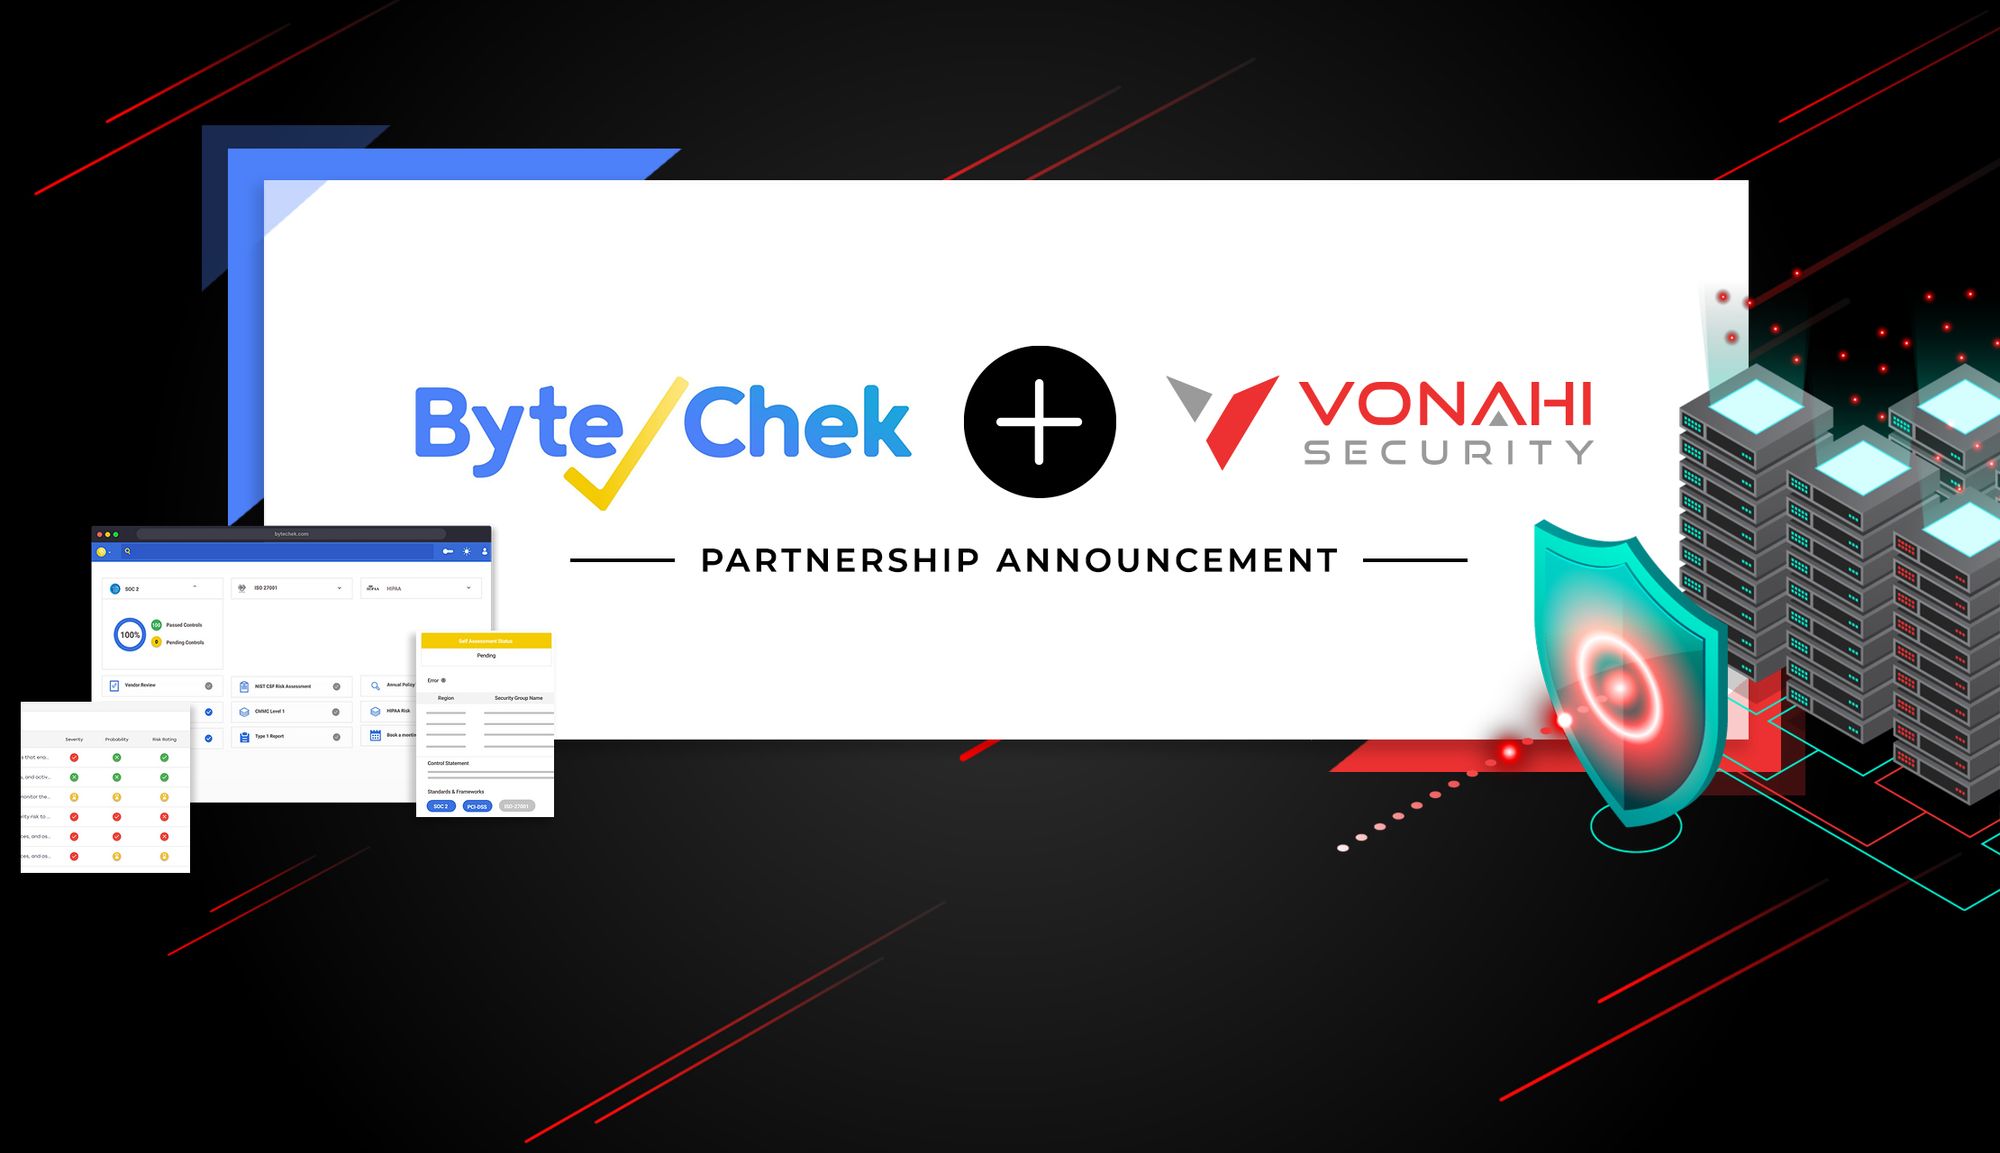 Vonahi Security and ByteChek Join Forces to Simplify Security Compliance